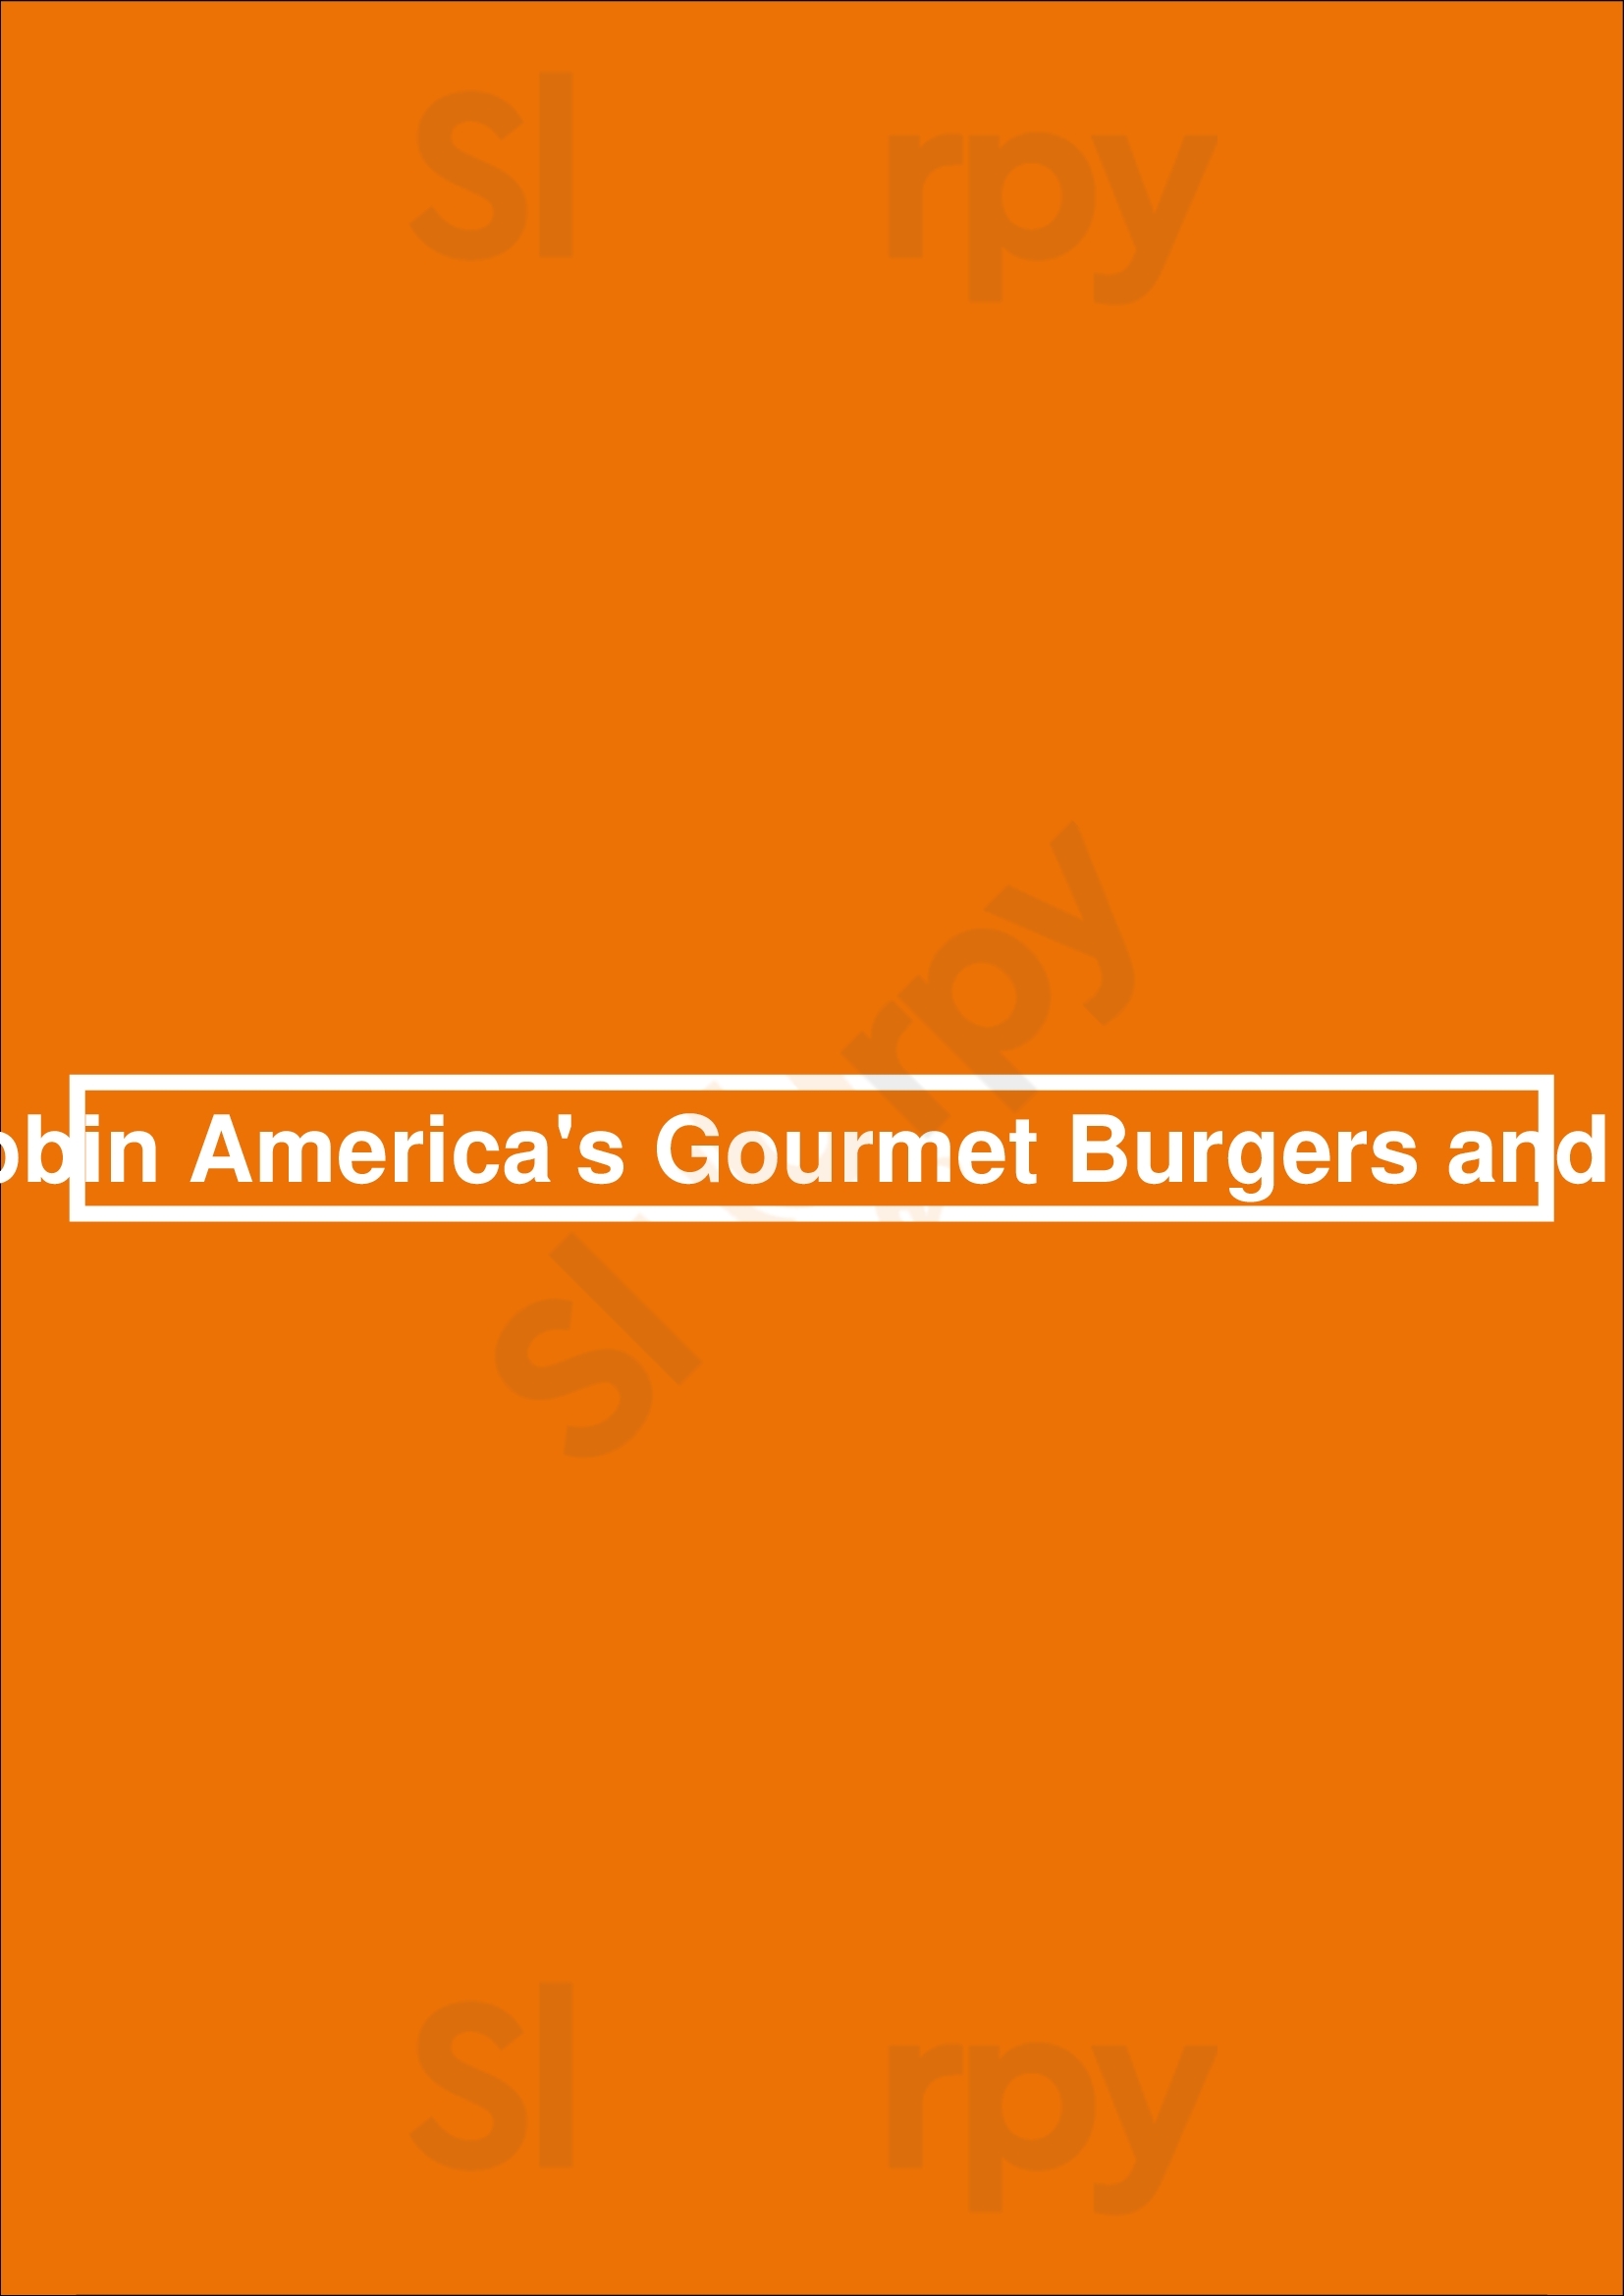 Red Robin America's Gourmet Burgers And Spirits Chesterfield Menu - 1